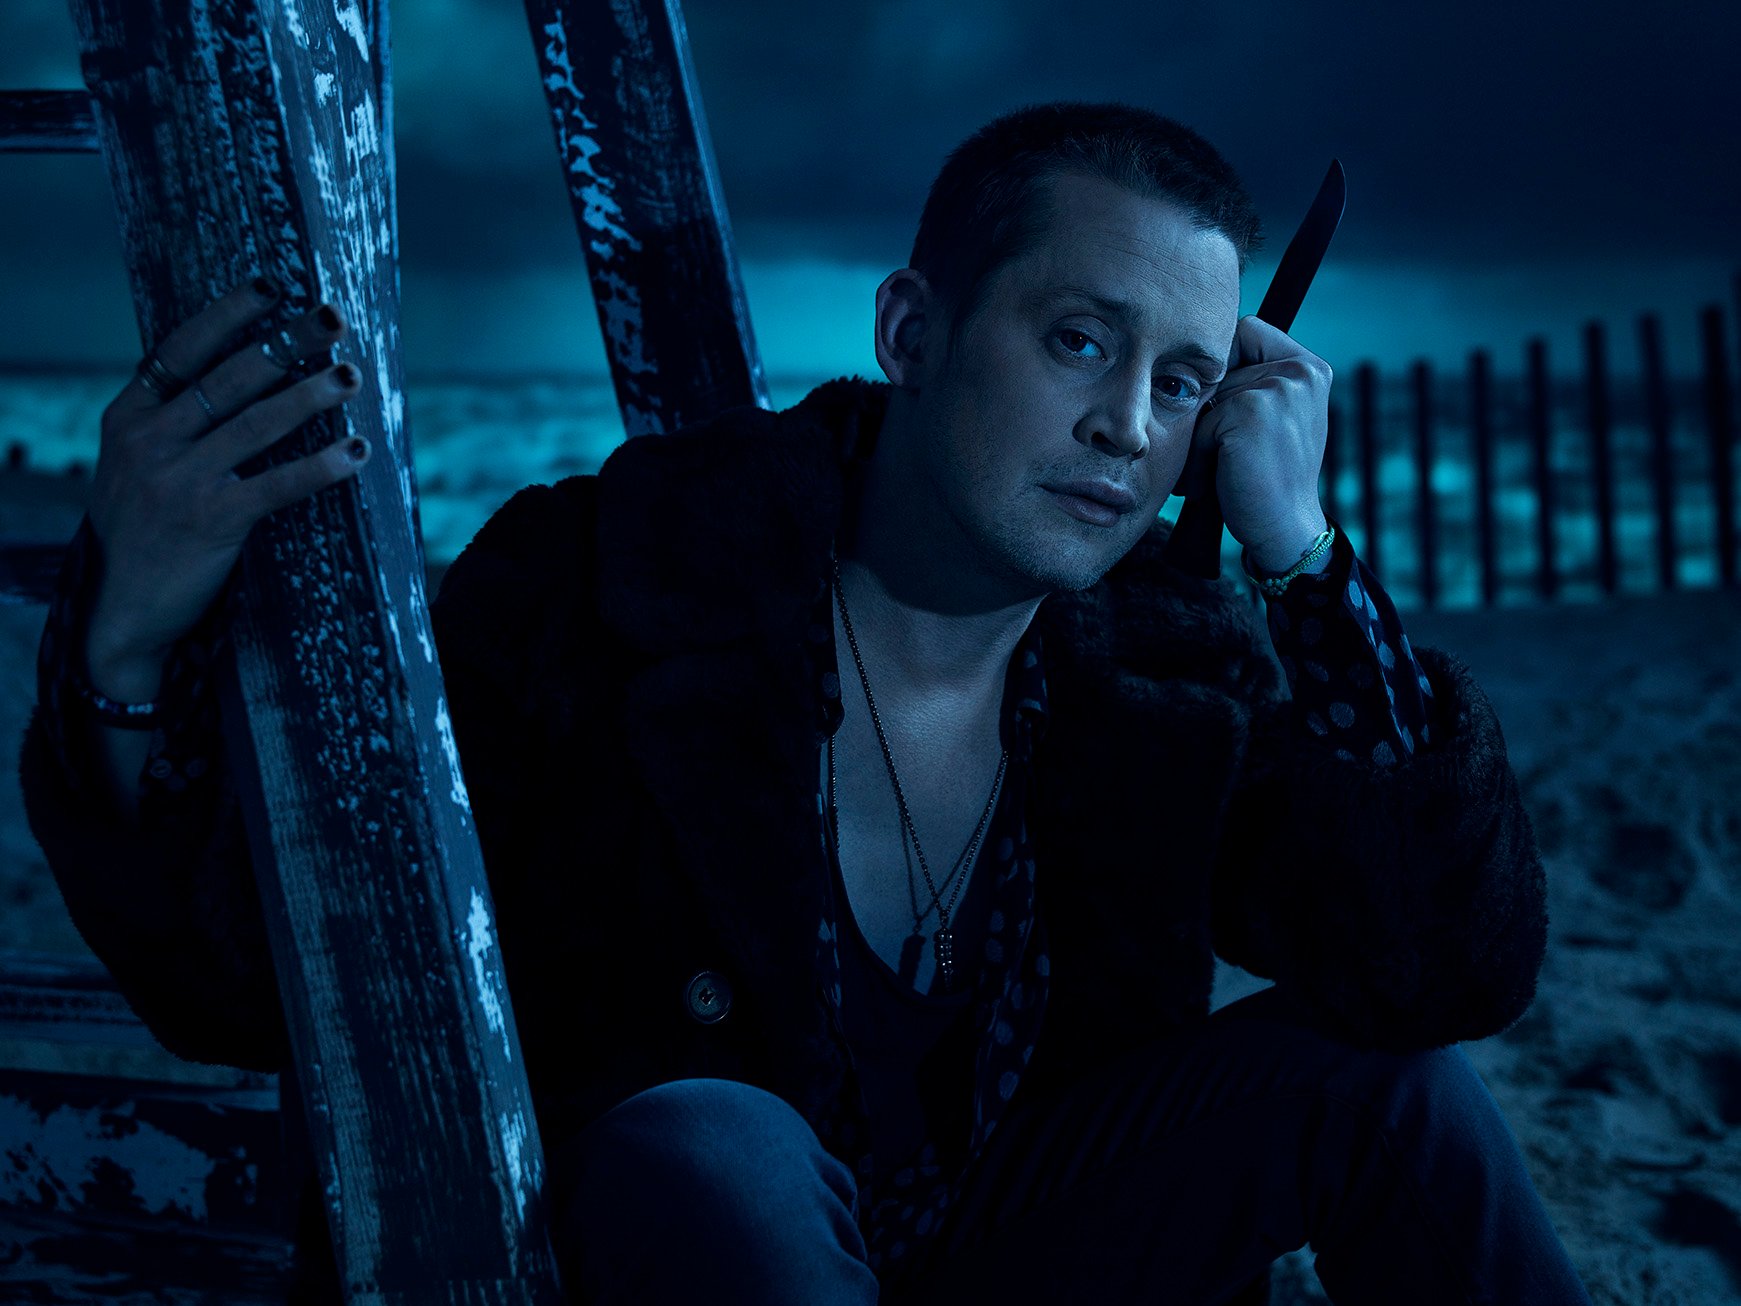 Macaulay Culkin as Mickey in 'American Horror Story' Season 10. He's sitting on the beach and holding onto a wooden pole while holding a knife in the other hand.